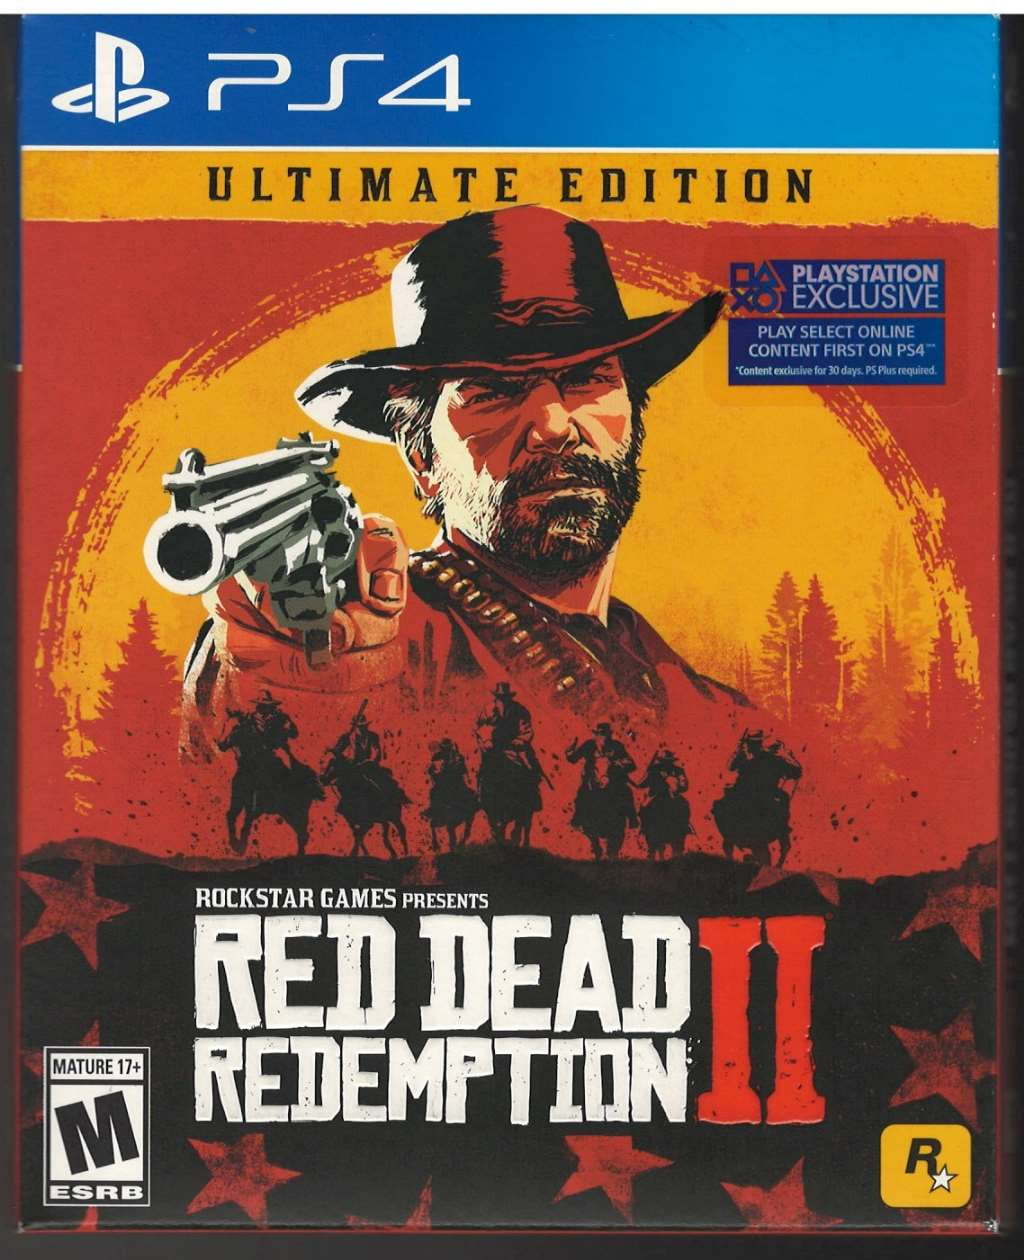 Red Redemption 2: Ultimate Edition Walmart.com